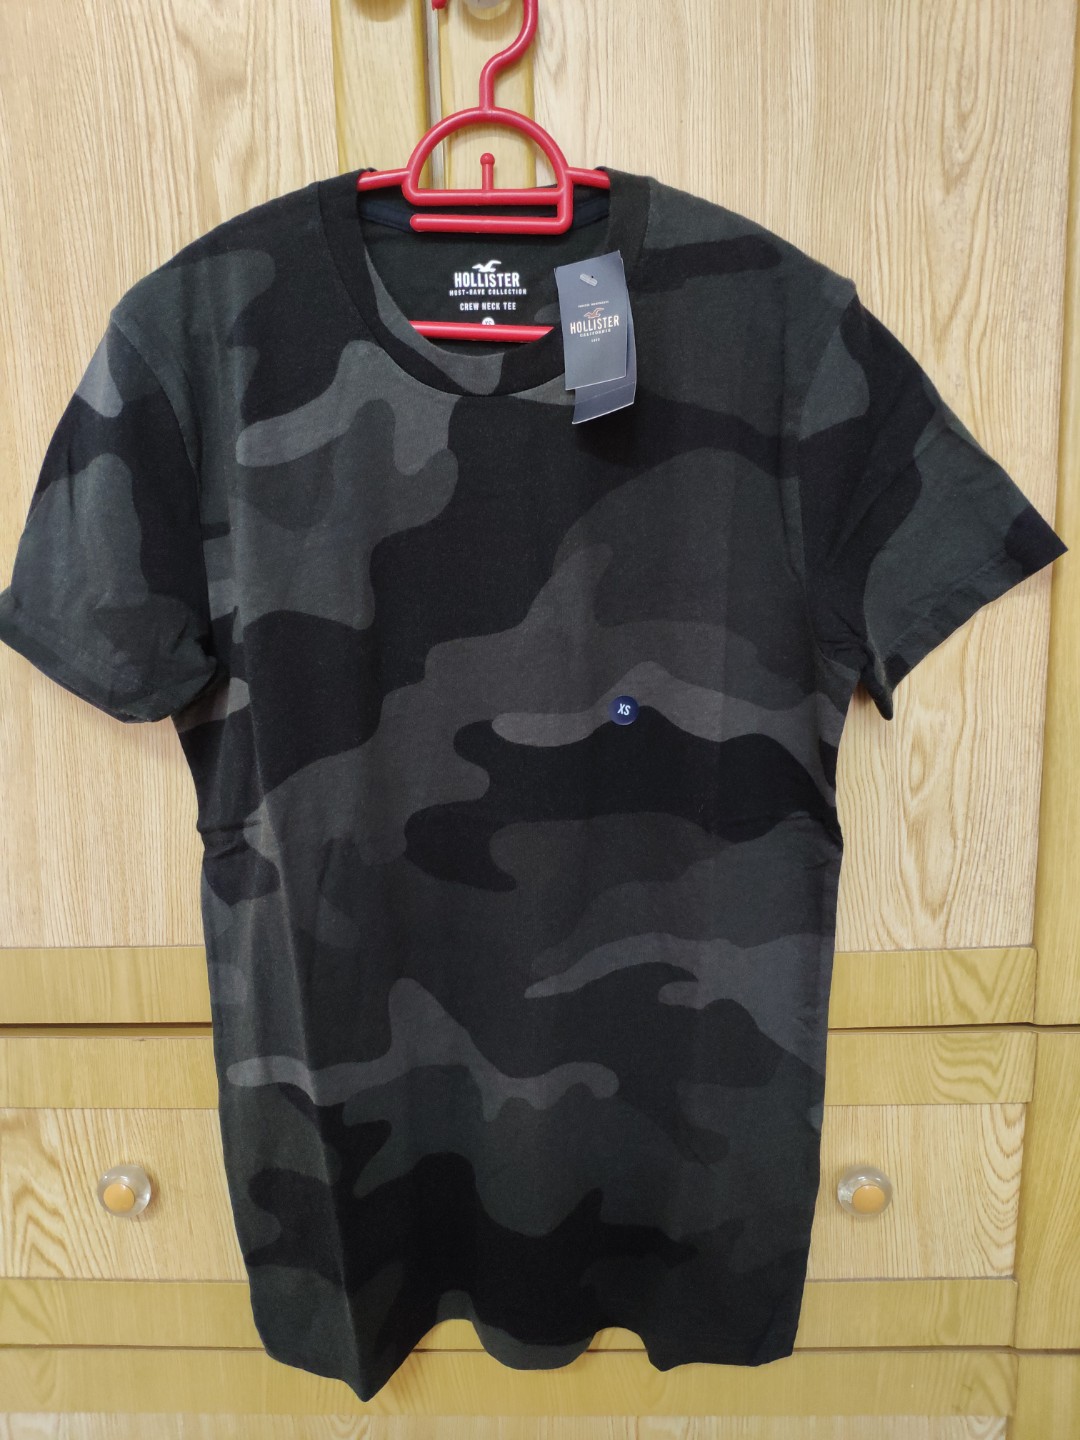 hollister t shirt camouflage